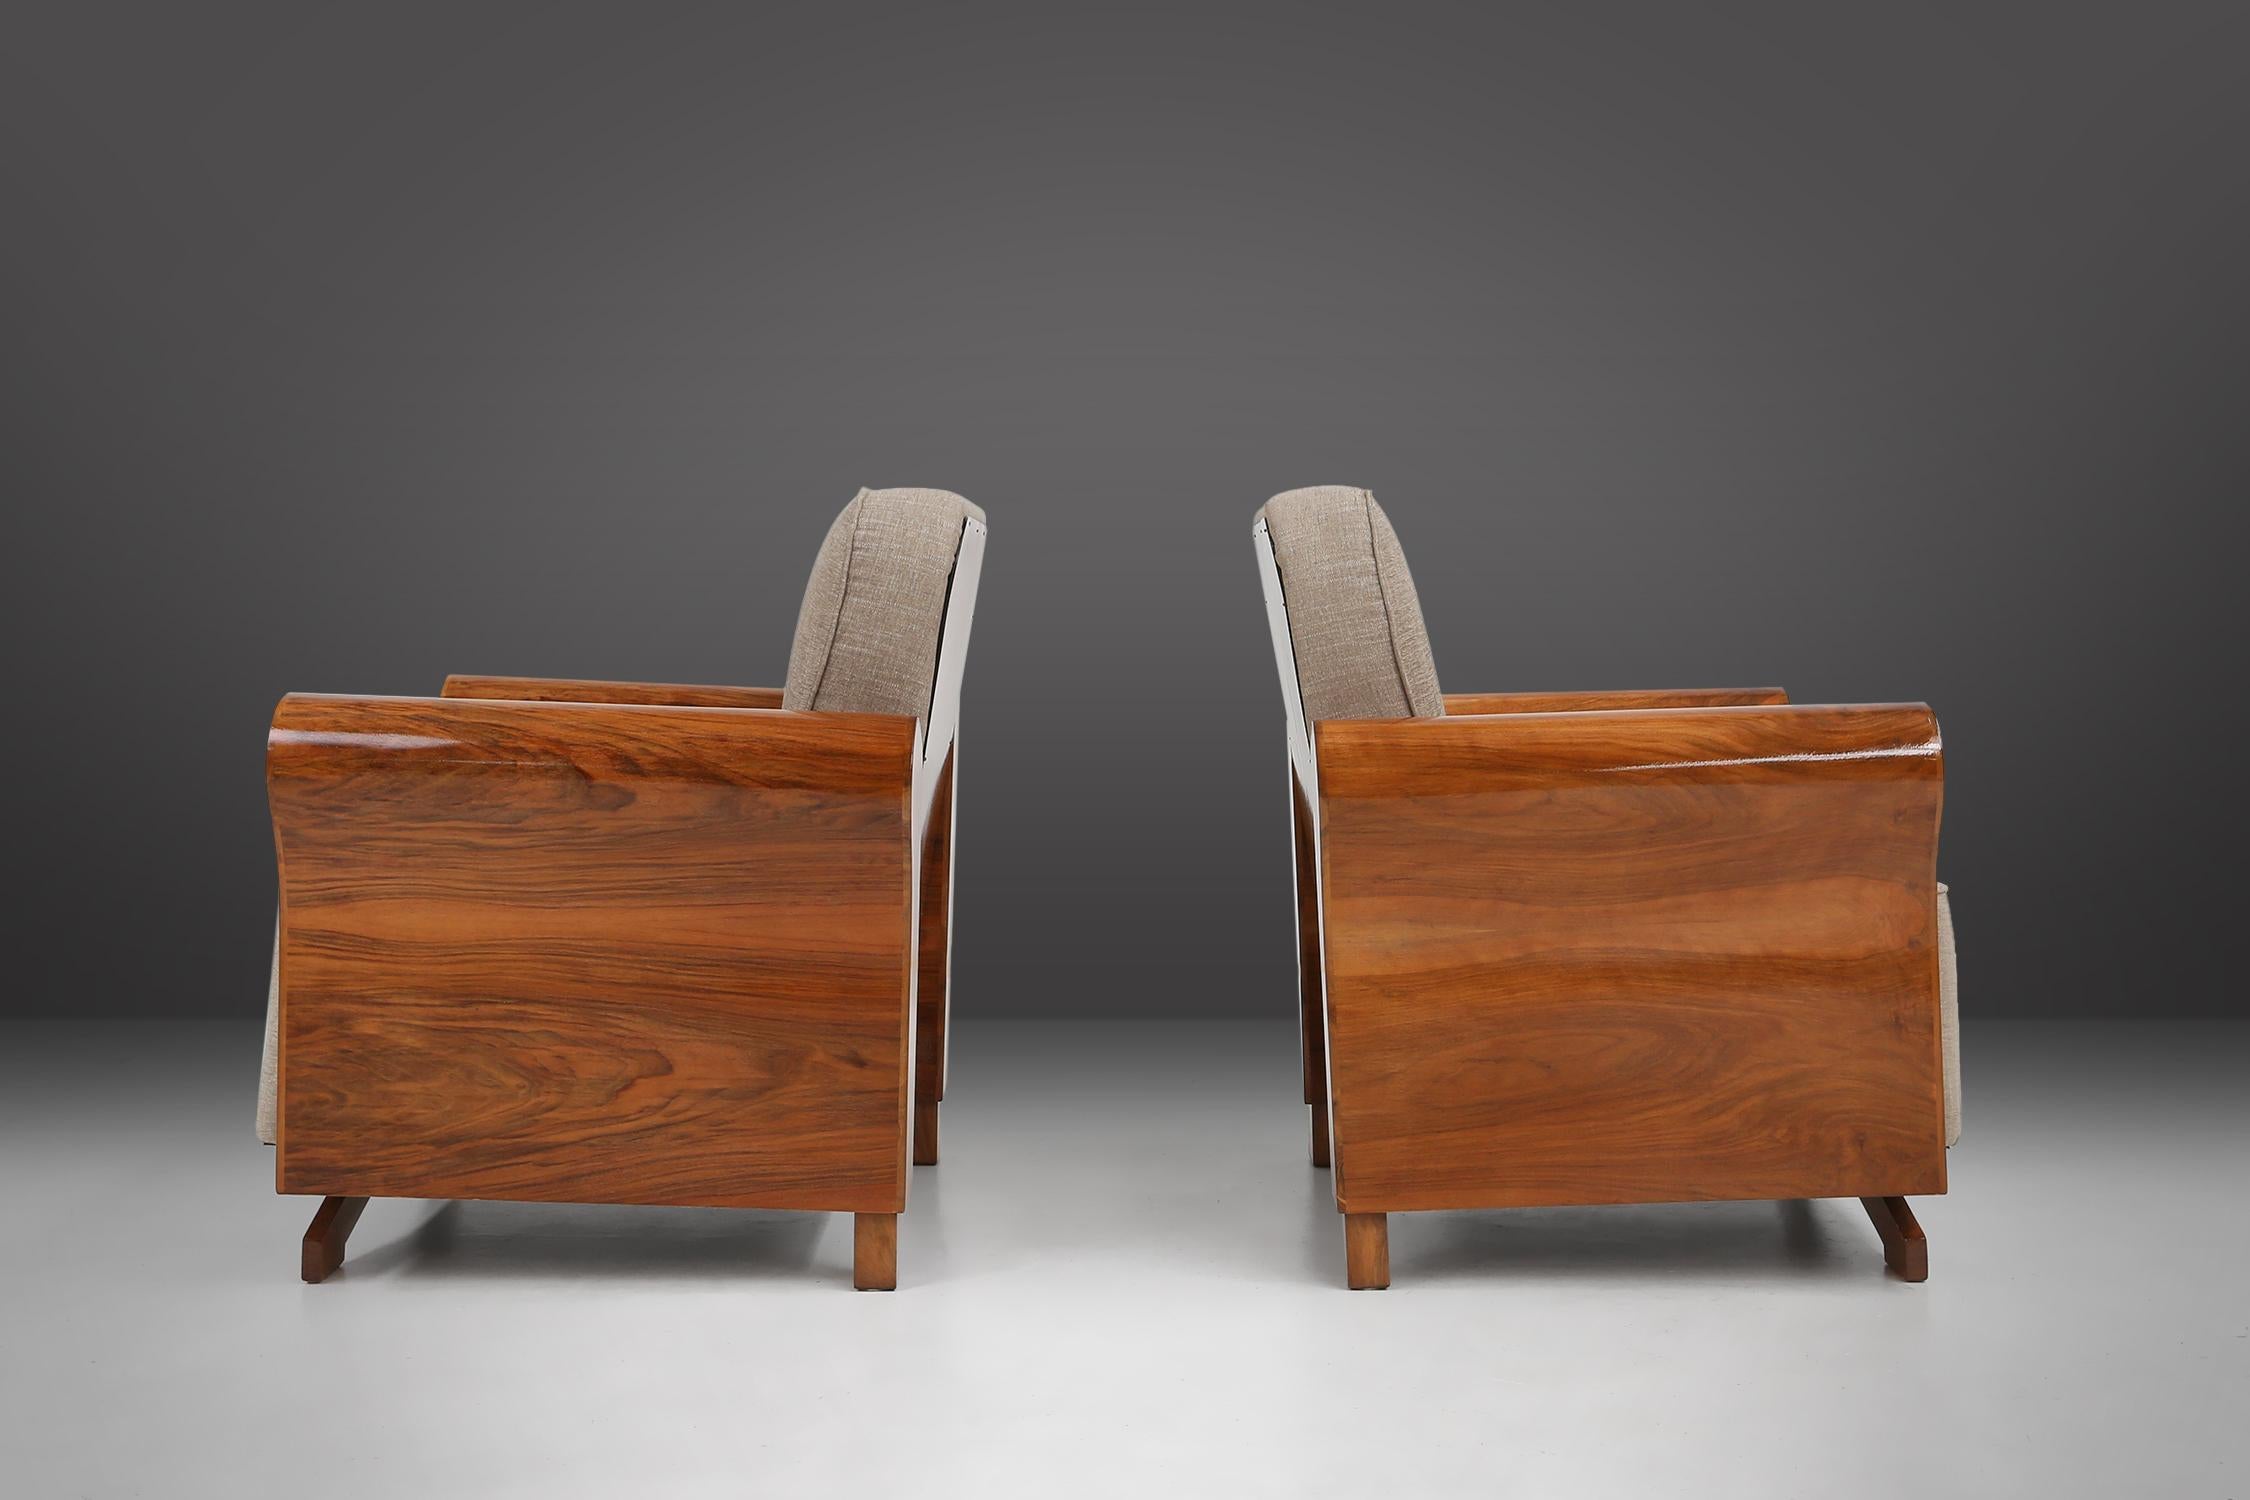 France / 1930 / set of 2 armchairs / walnut veneer and grey upholstery / Art Deco

A very stylish and extremely well made pair of Art Deco armchairs made in France in the 1930s. Crafted with the finest materials and attention to detail, these